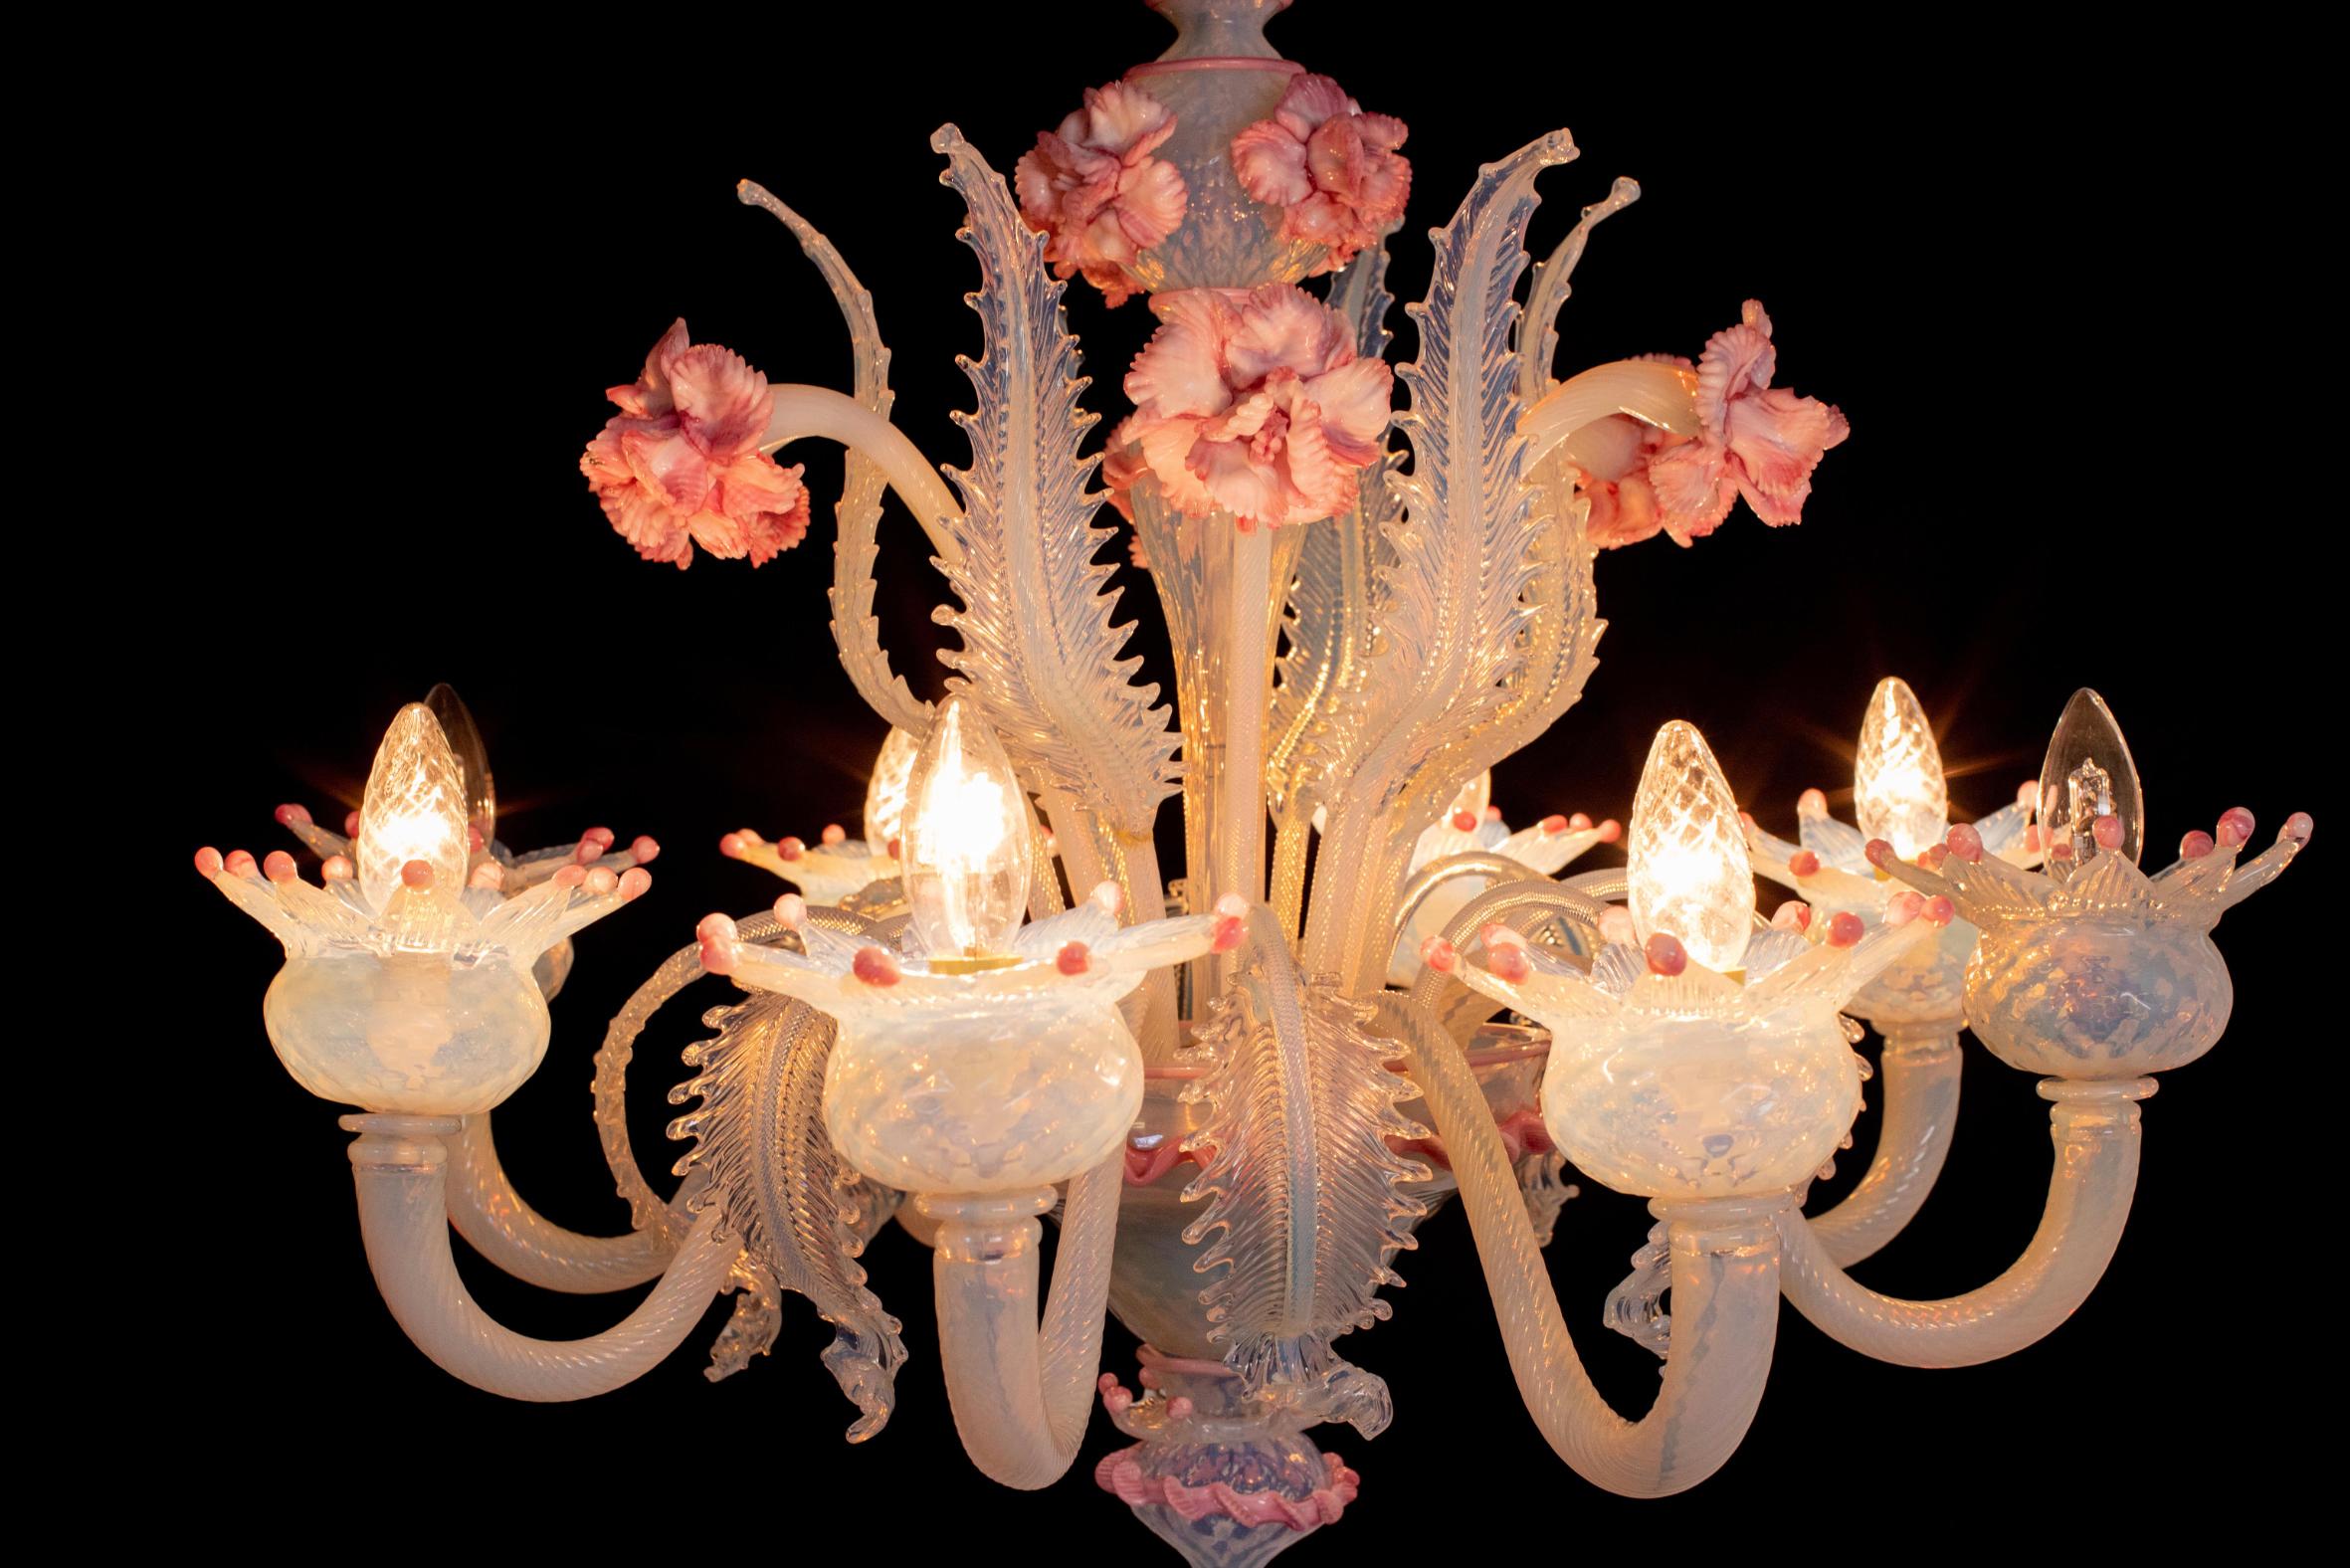 Stunning Trio Light Blue and Pink Venetian Chandeliers, Murano, 1950s For Sale 12